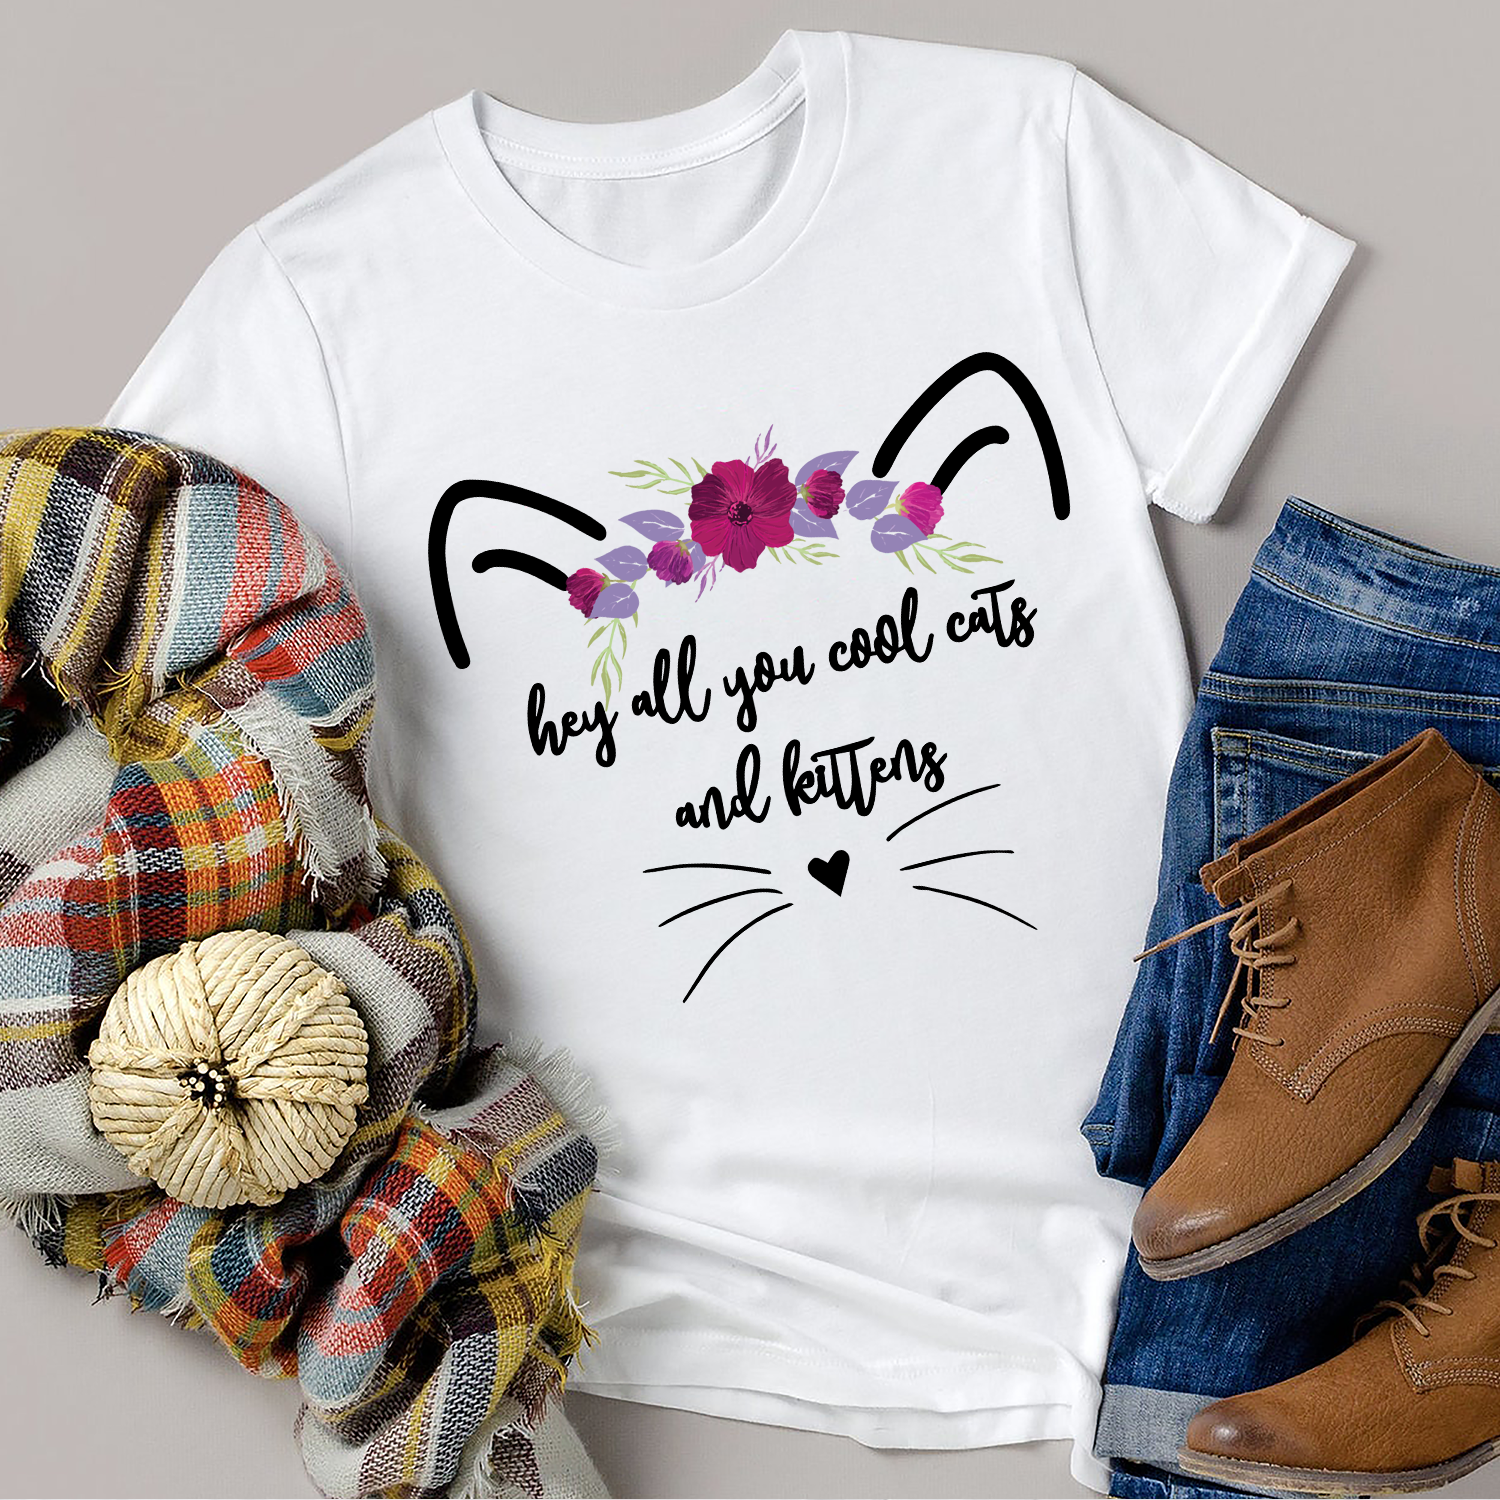 Hey All You Cool Cats and Kittens T-Shirt